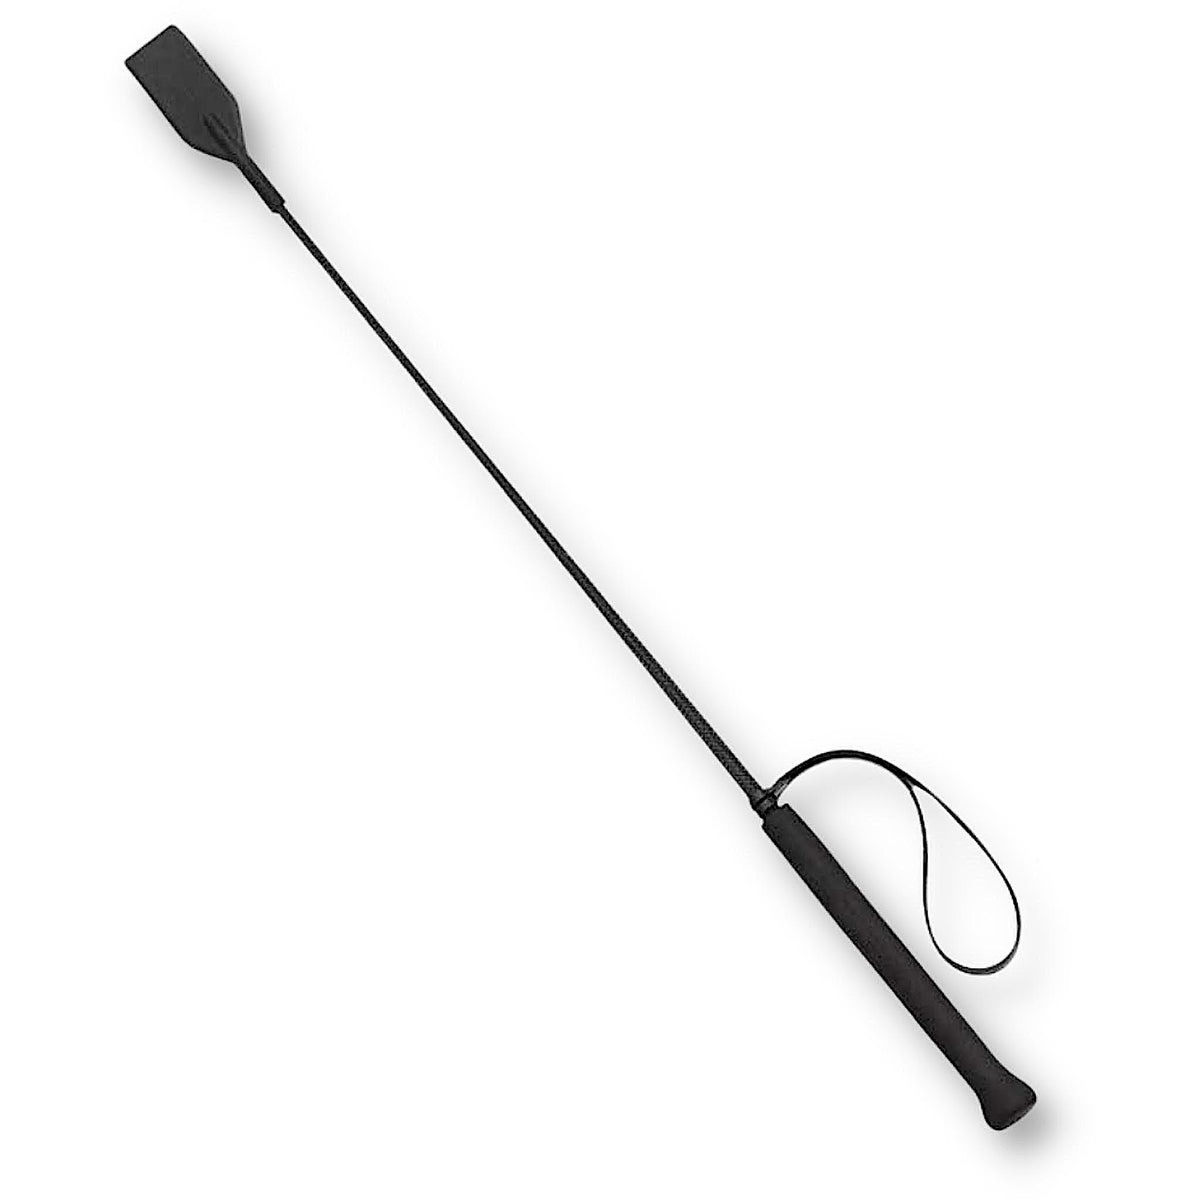 Black riding crop with foam handle, hand loop, braided shaft, rubber flapper.